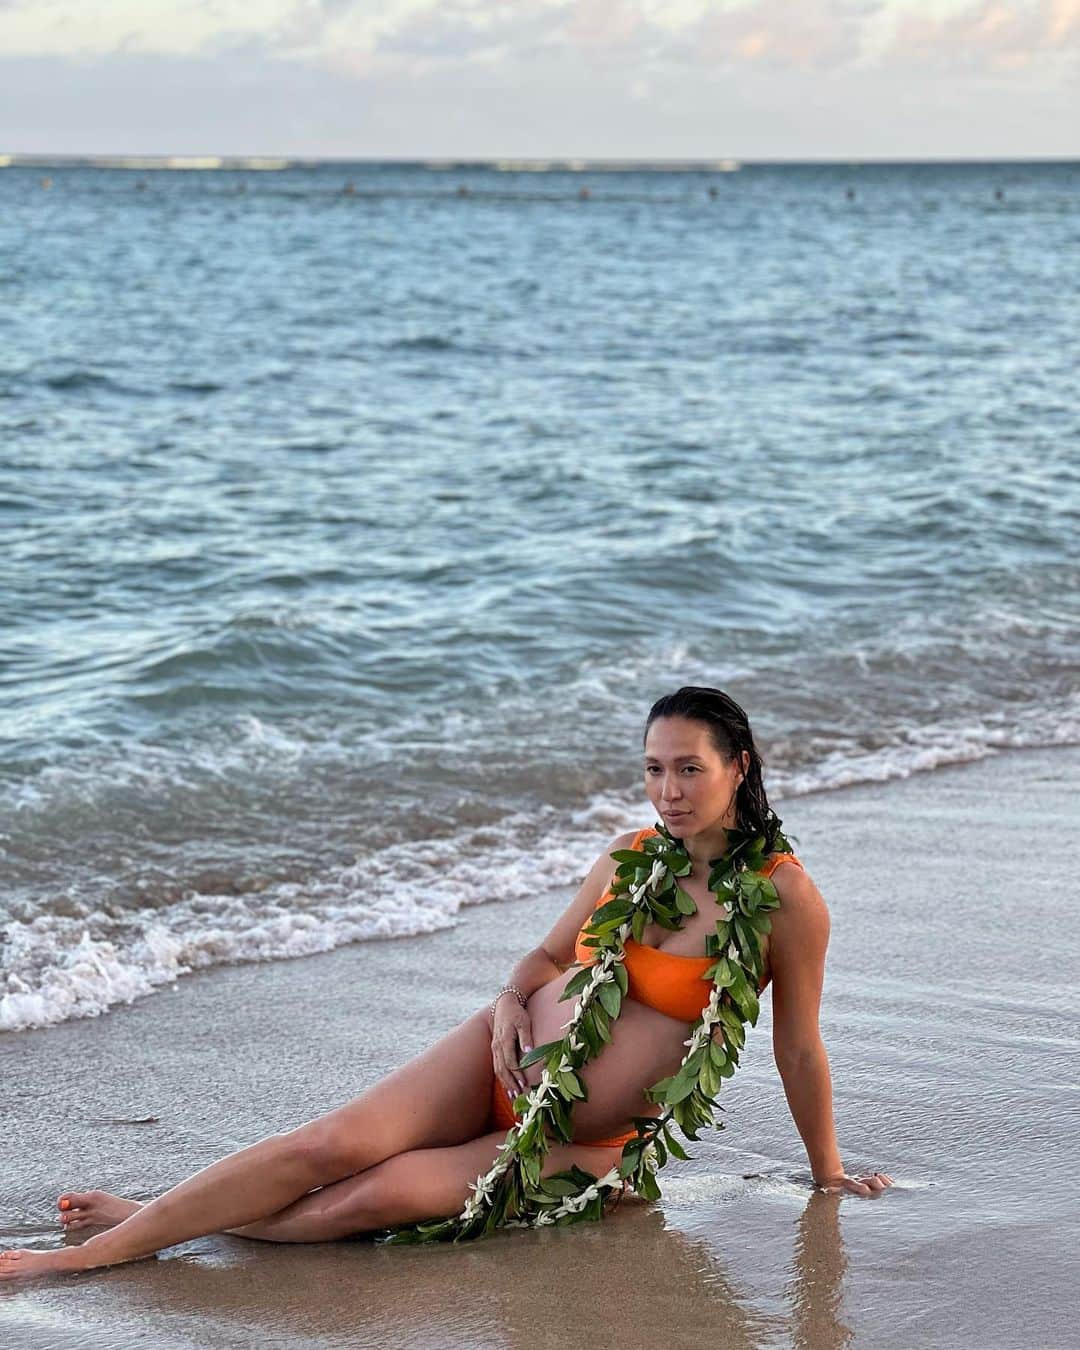 Livのインスタグラム：「Some iPhone pics from my #solobabymoon in Hawaii. My girlfriends lei’d me and it was magical. Getting really ready to have this baby! #34weekspregnant #lei #hawaii #mailelei #puakenikeni」